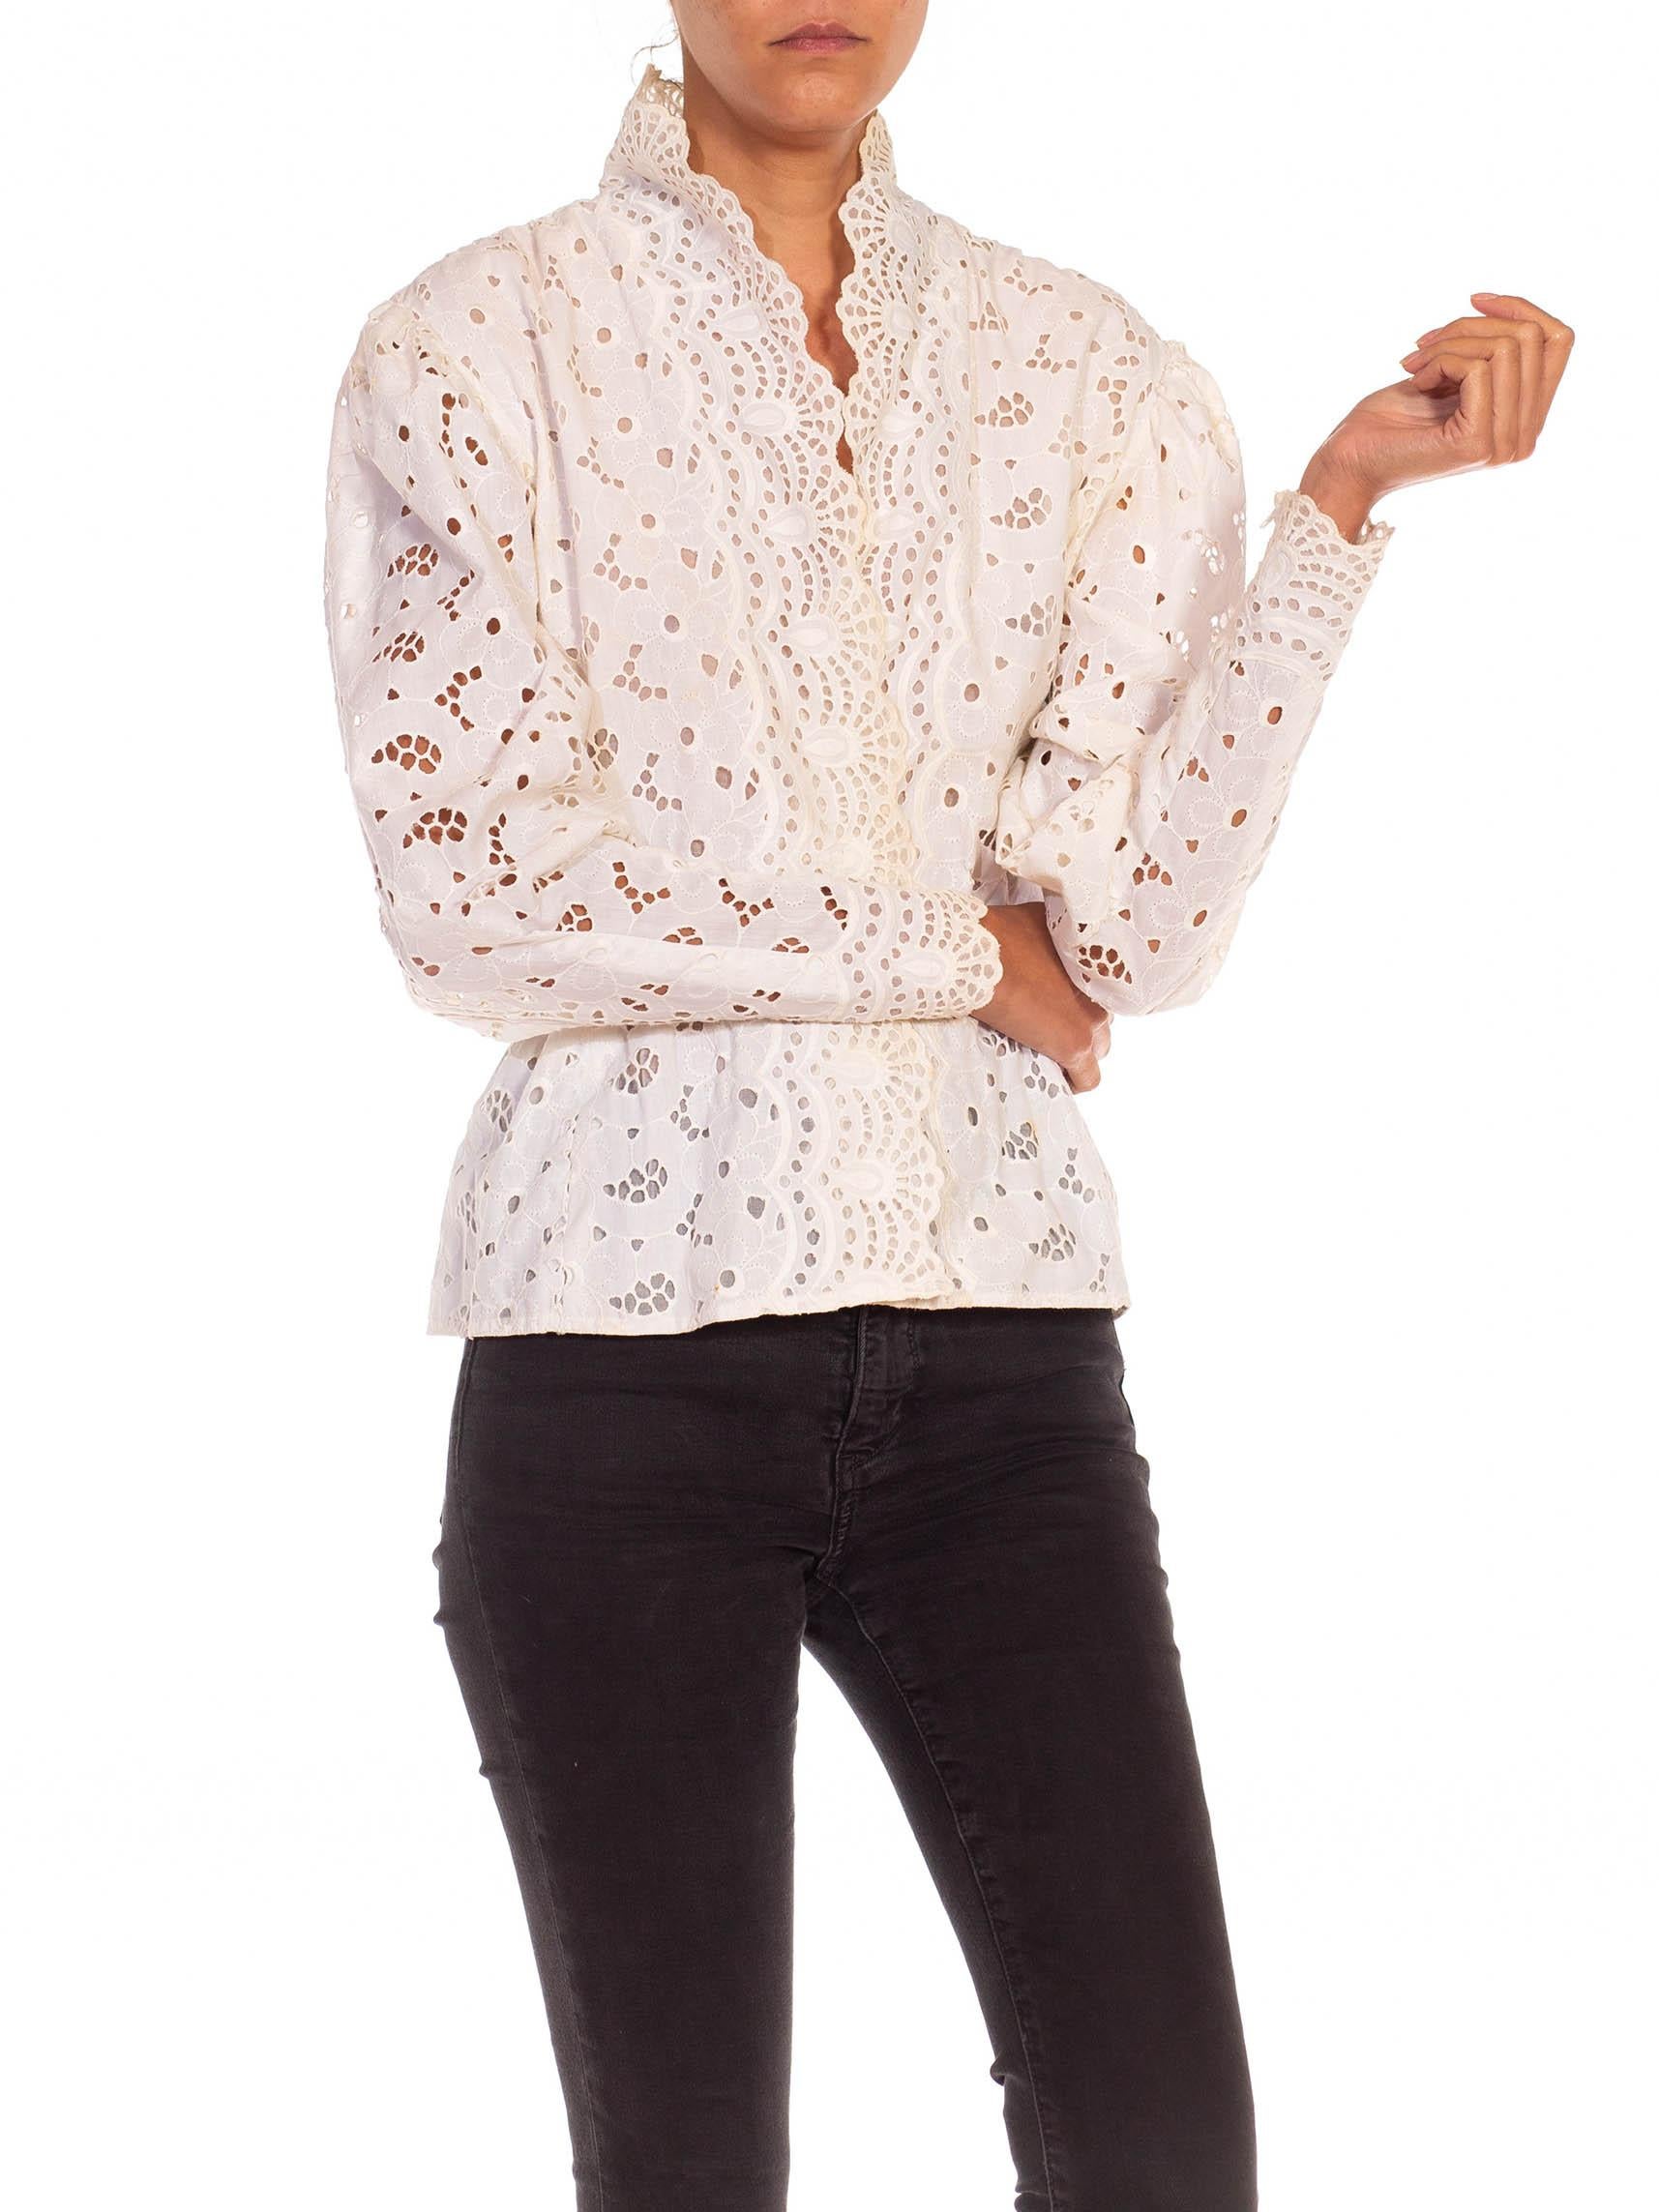 1960S Pauline Trigere Cream Cotton Eyelet Lace Top For Sale 5